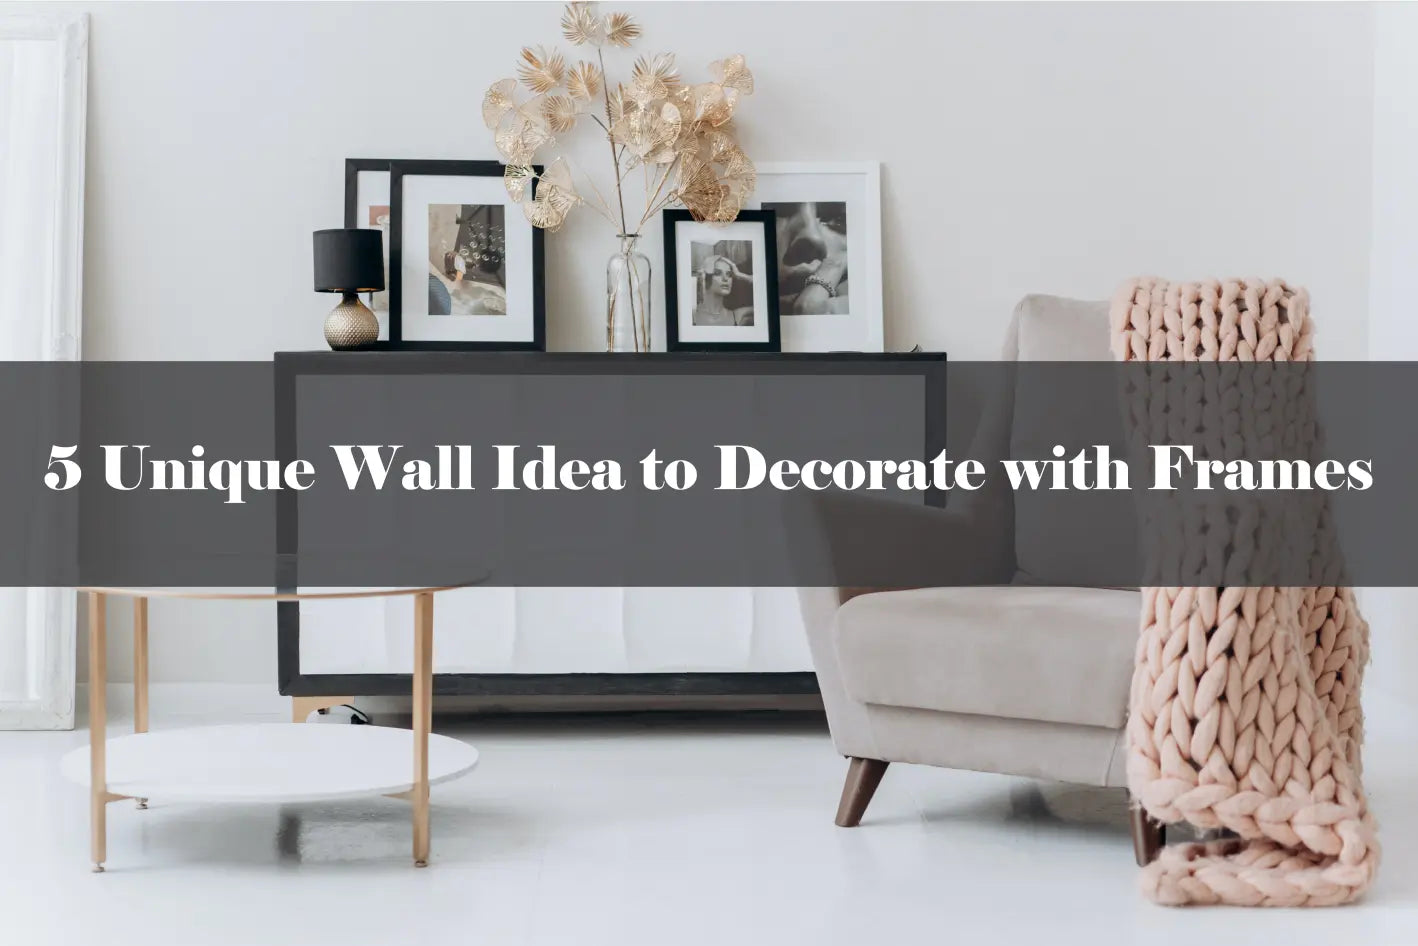 5 Unique Wall Ideas to Decorate with Frames